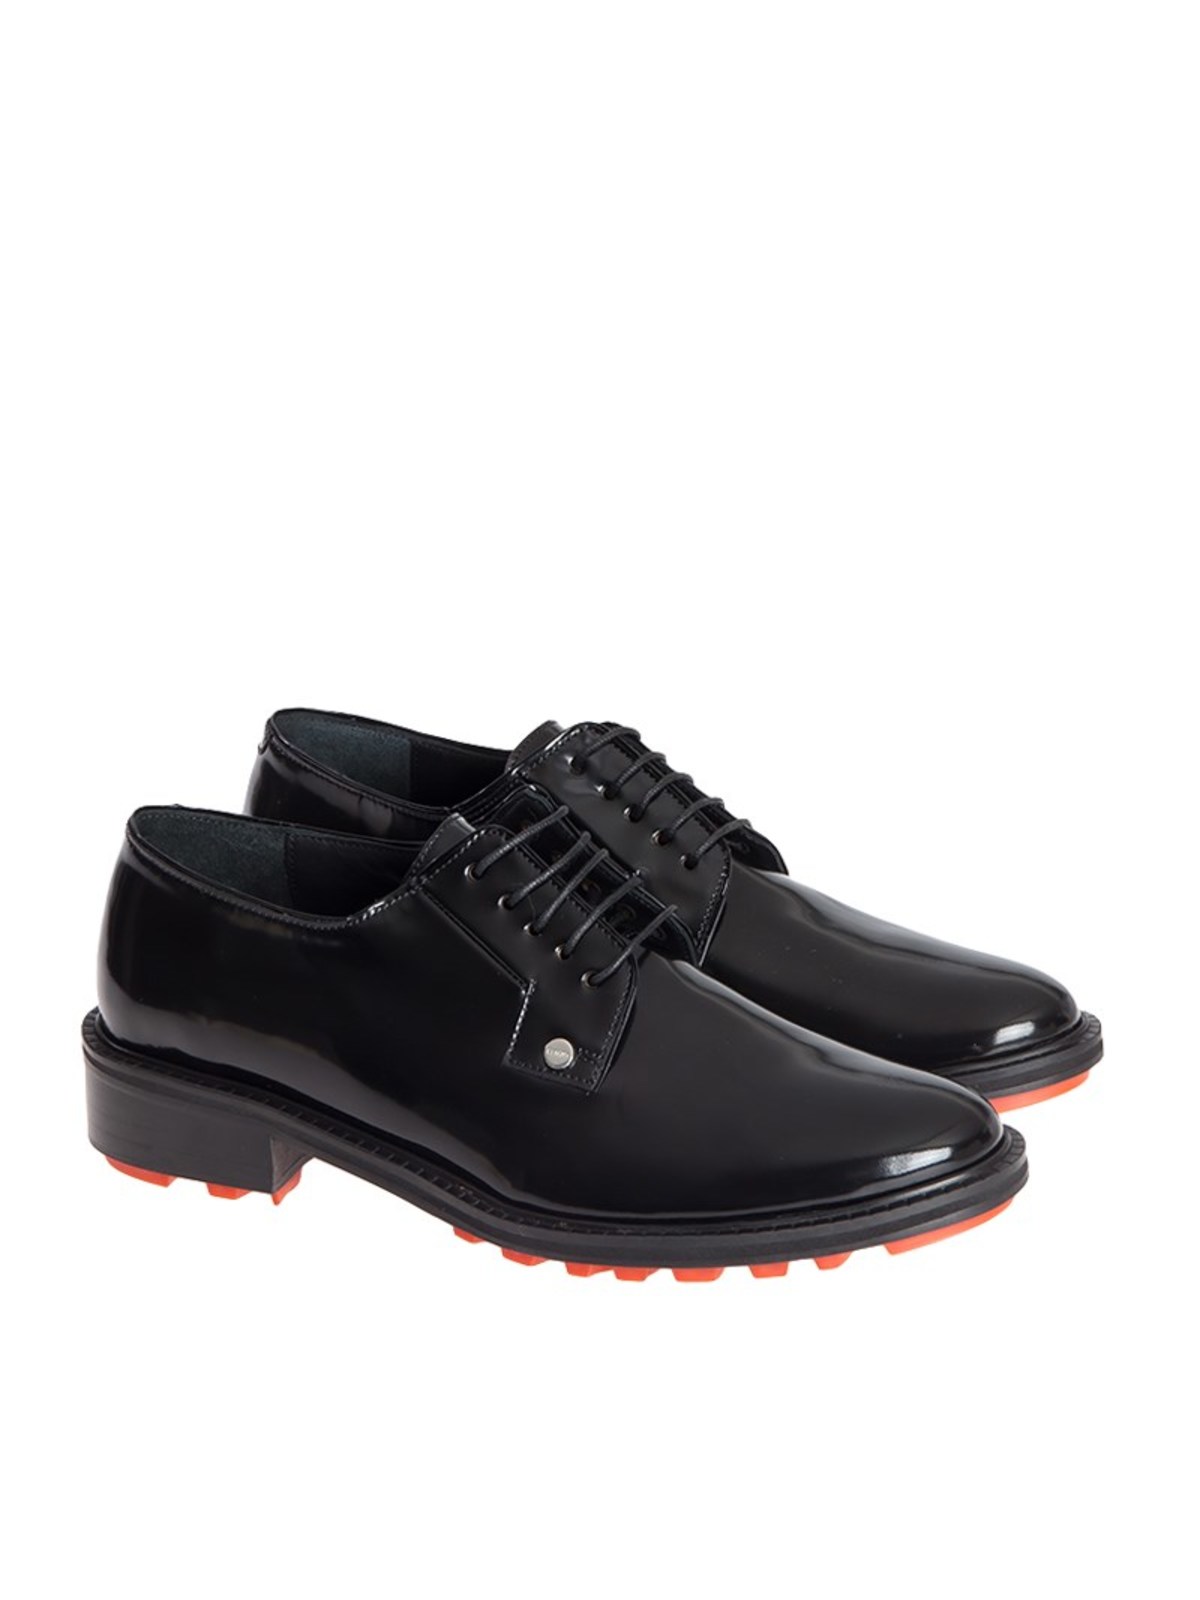 KENZO DERBY SHOES